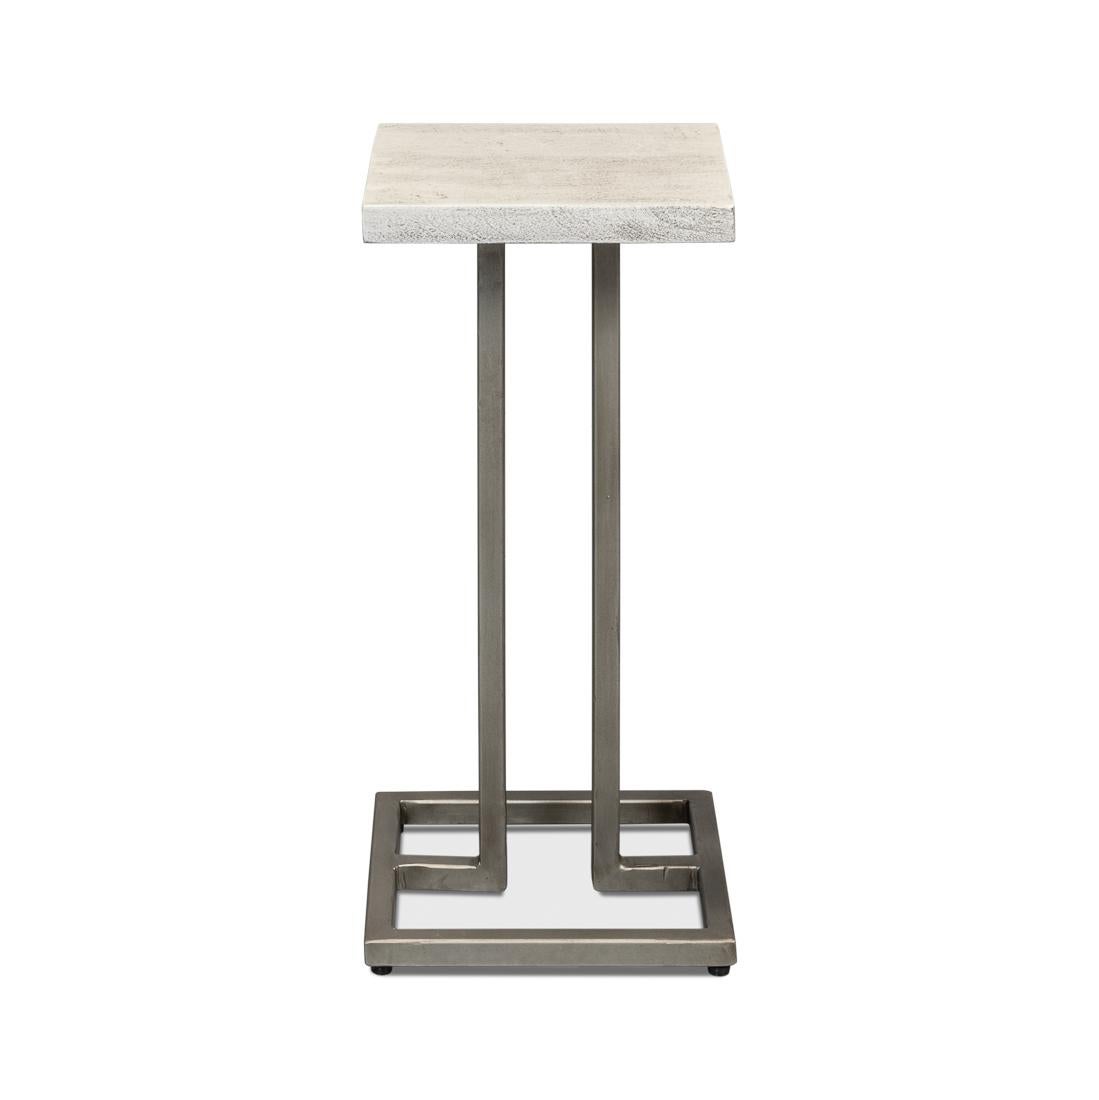 A seamless blend of industrial charm and contemporary flair. This table boasts a gray-white square wooden top that lends a modern, textured appeal, perfect for those who covet an edgy, yet elegant aesthetic.

Supported by a sleek, geometric metal